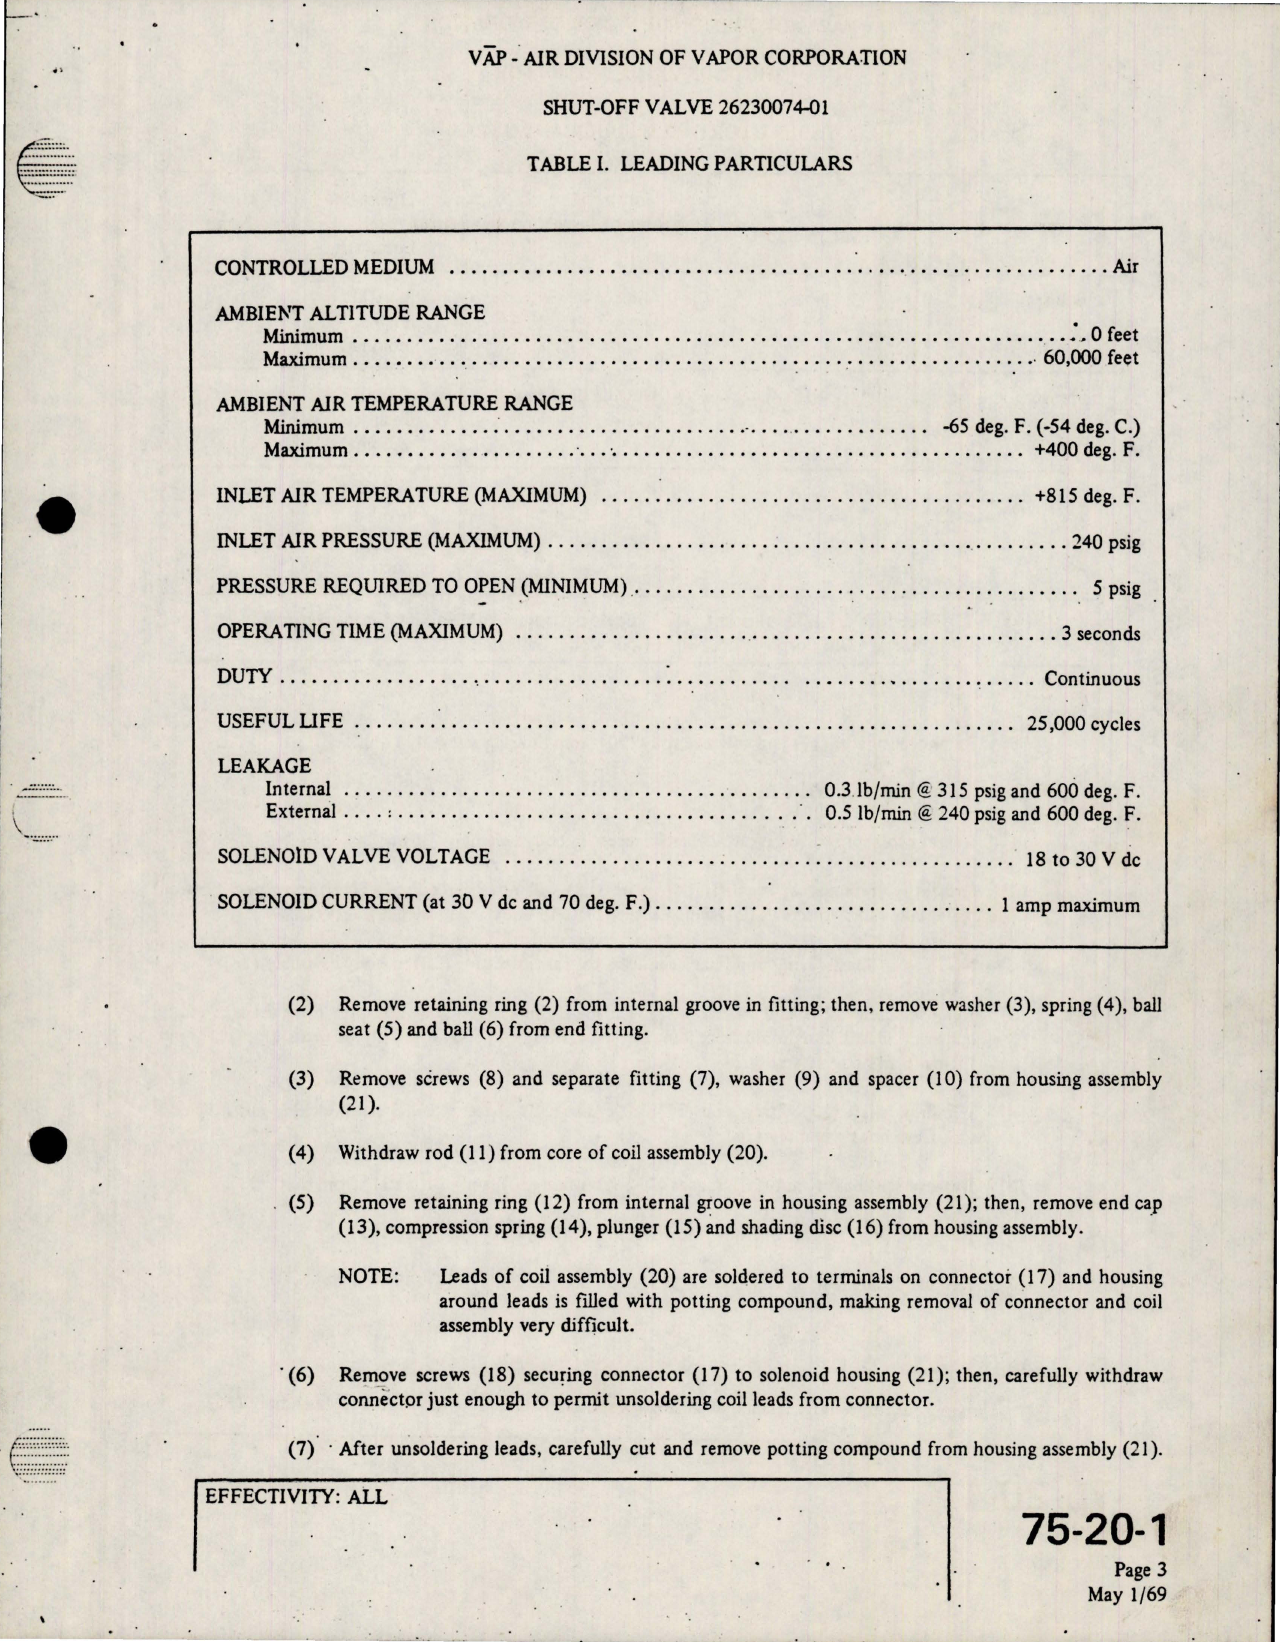 Sample page 7 from AirCorps Library document: Overhaul Instructions with Parts Breakdown for Shut Off Valve - Part 26230074-01